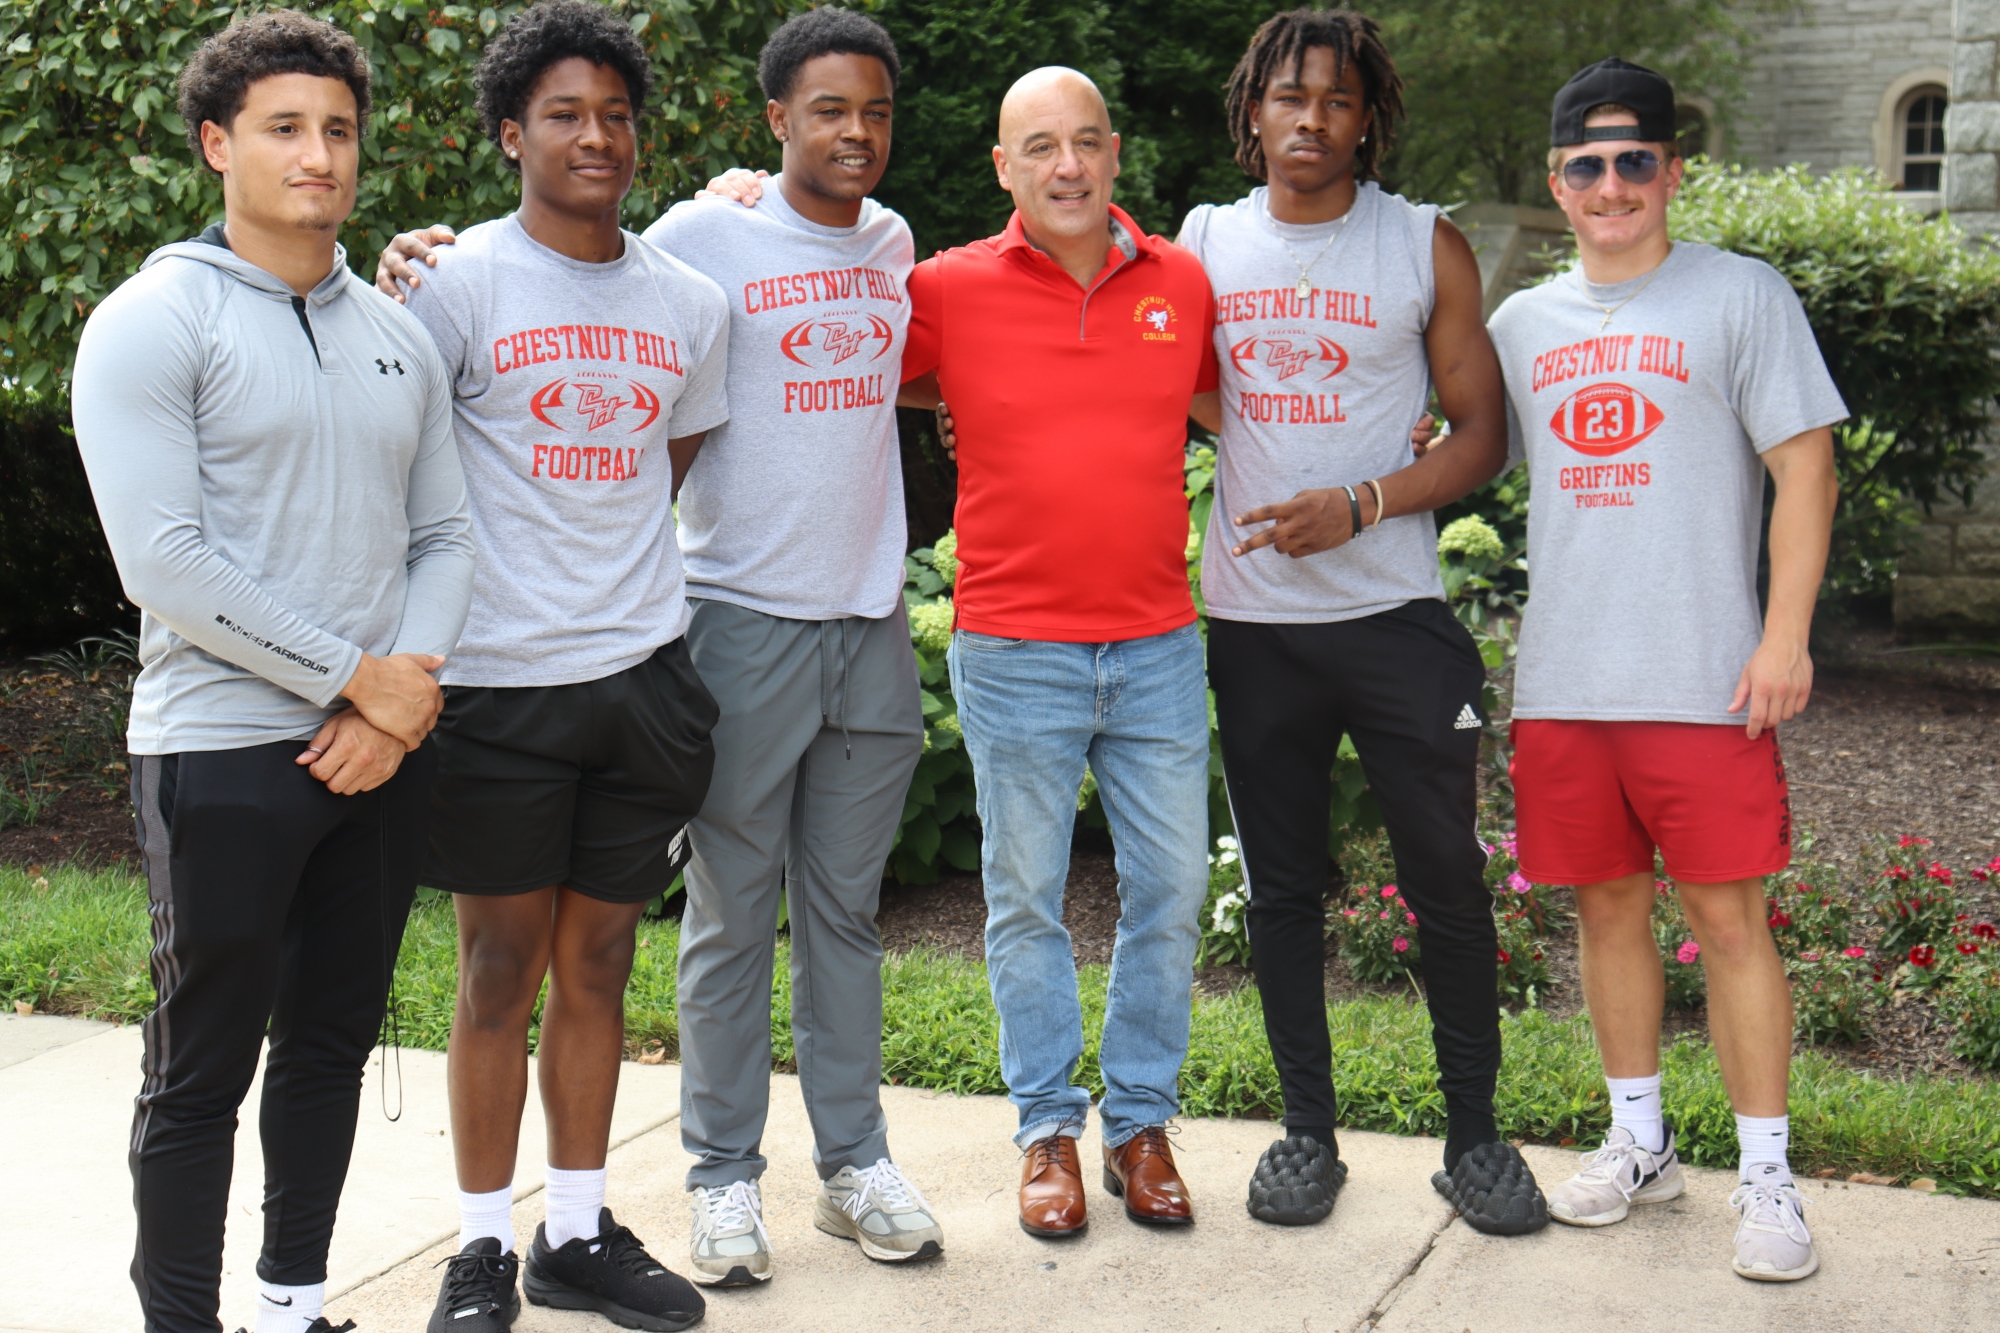 Dr. Latimer poses for a photo with members of the sprint football team during this year's move-in.